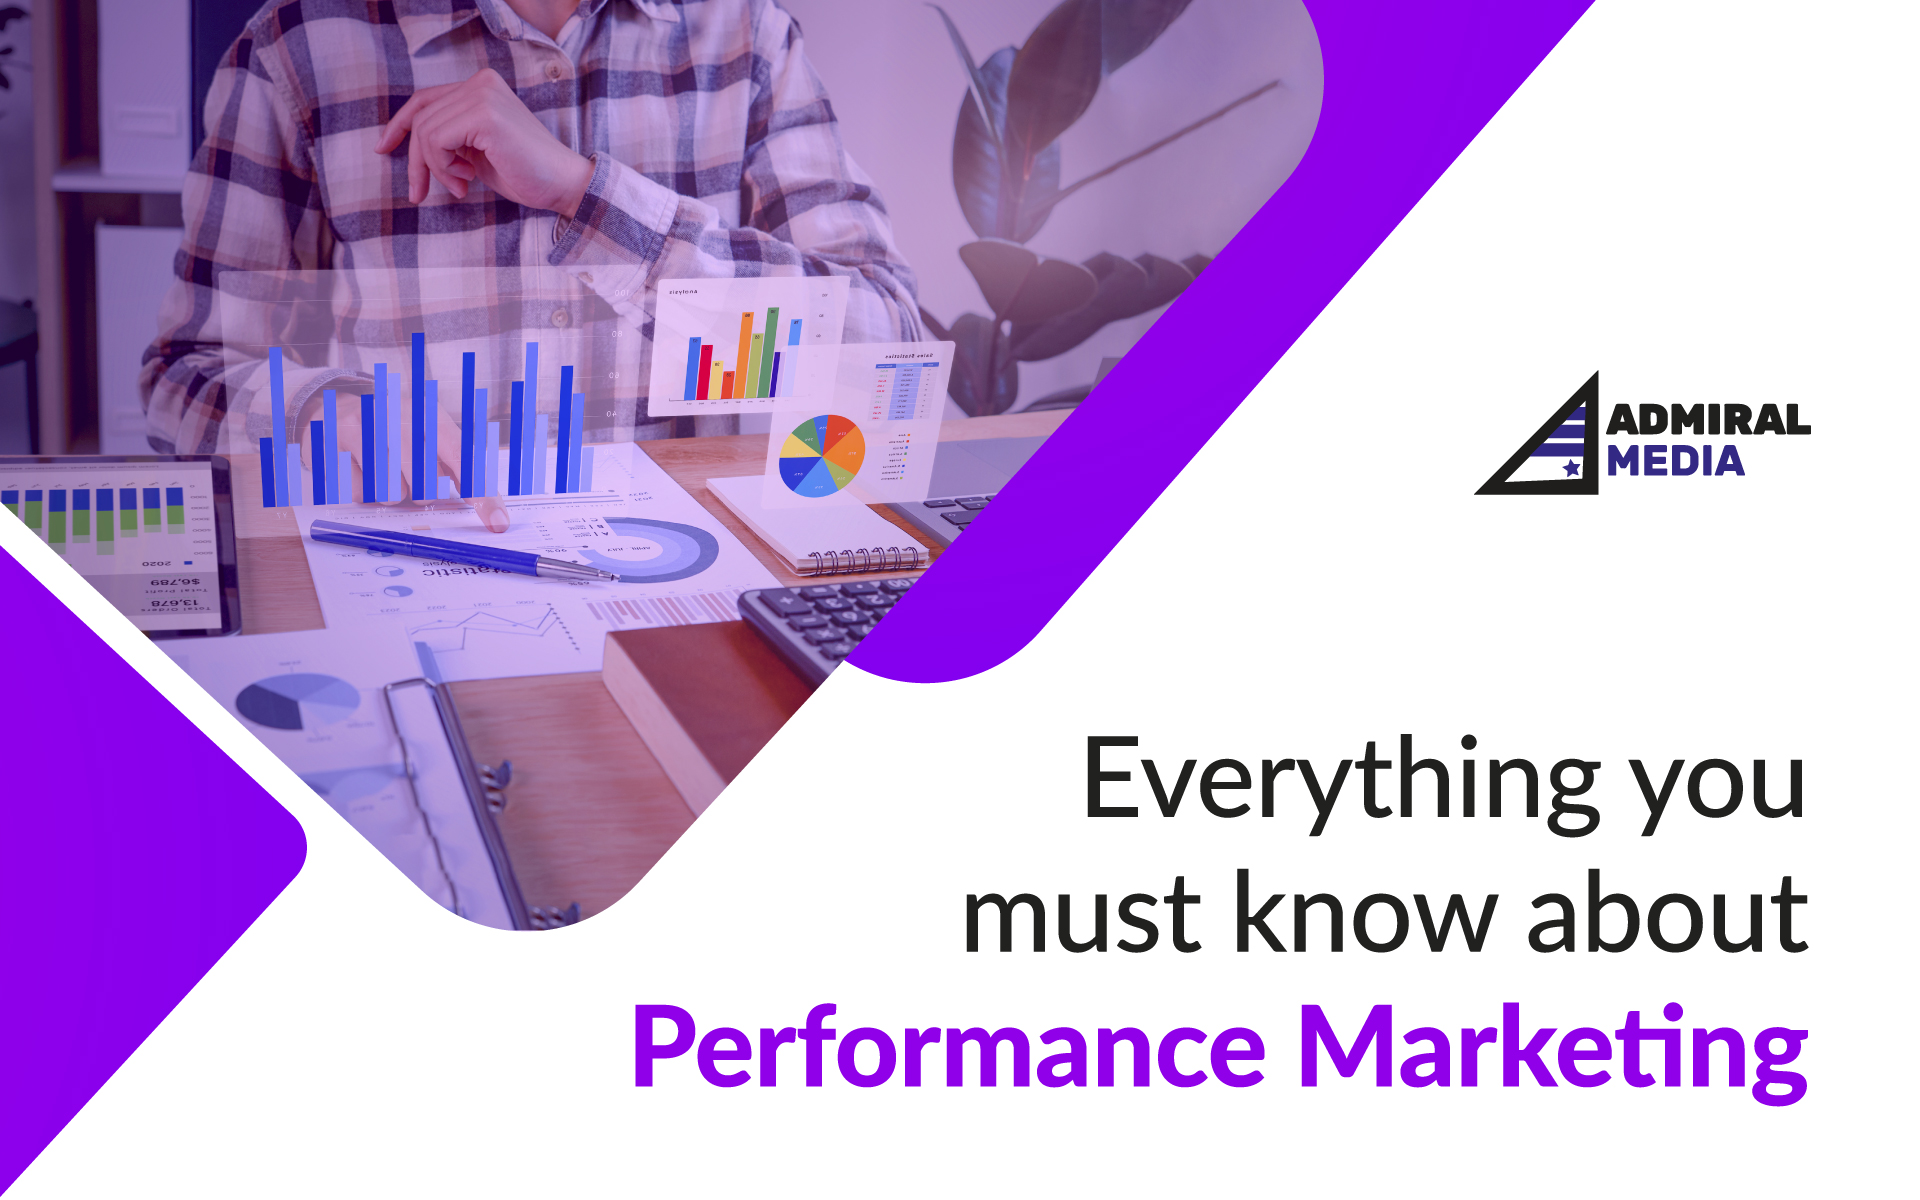 Performance Marketing: All You Need To Know